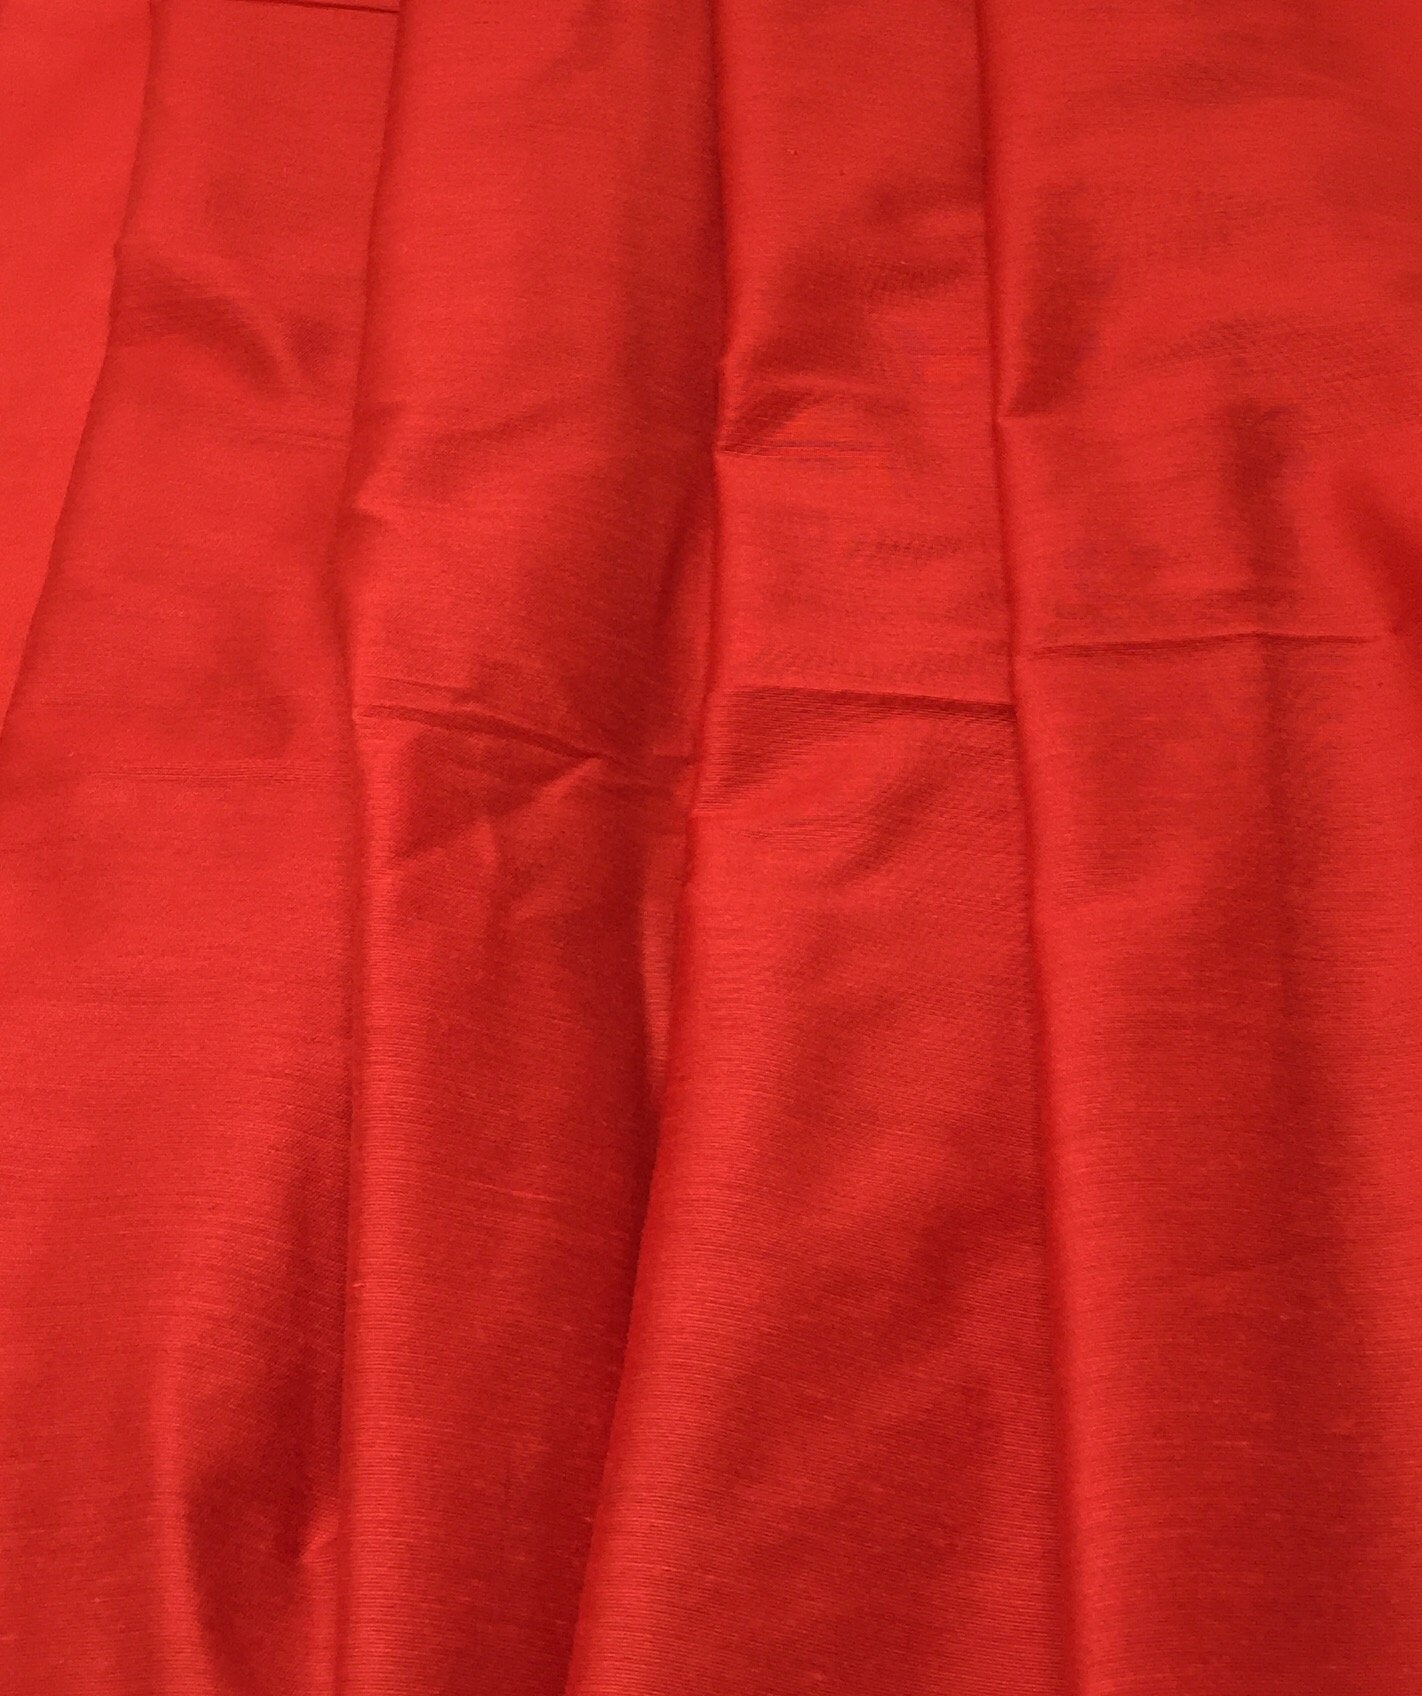 Cotton Silk Red Solids  Fabric Material - By the yard